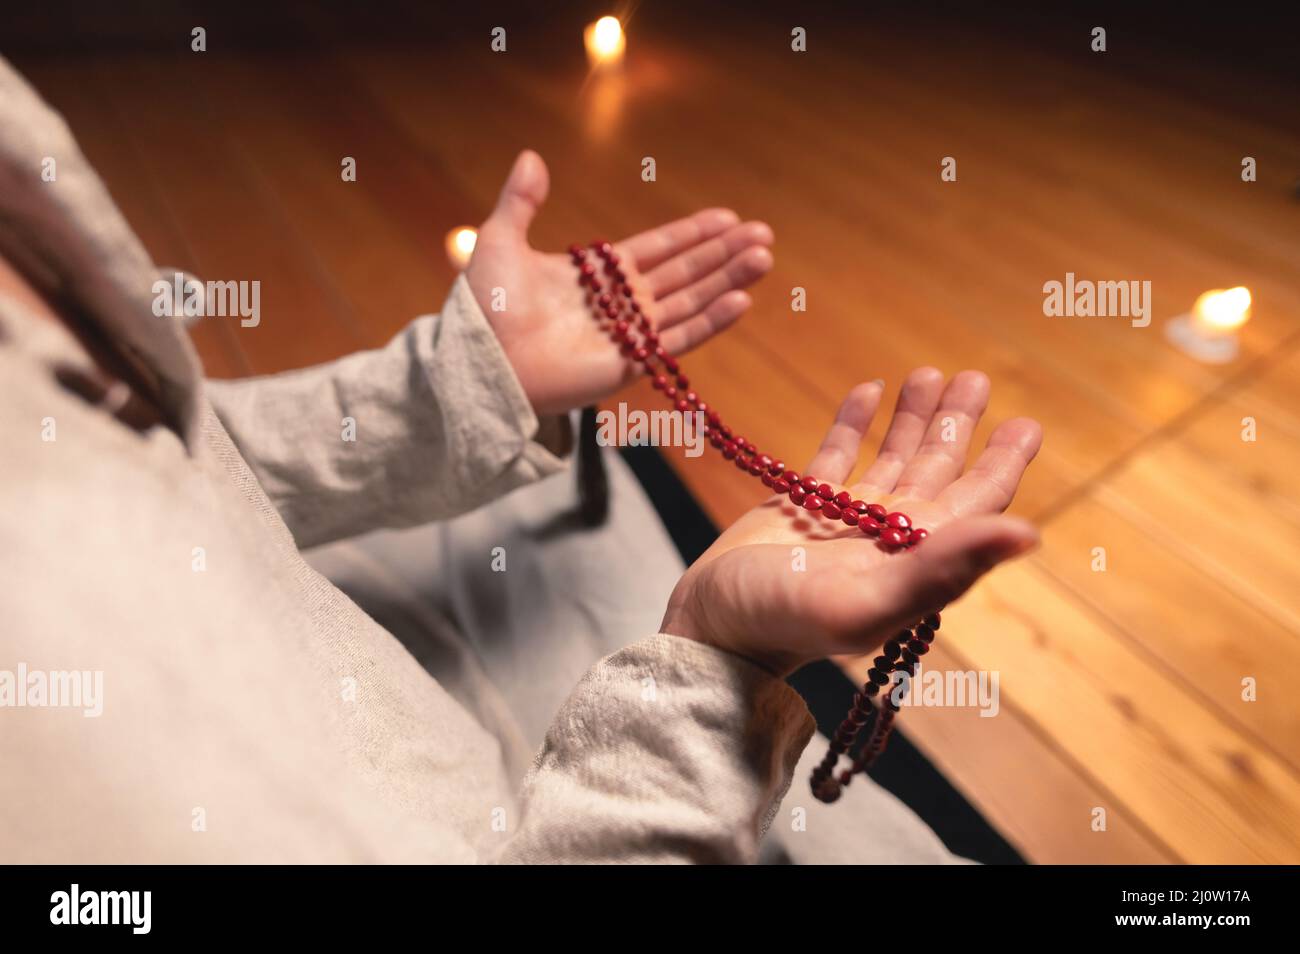 A close-up of the monk's hands hold red rosaries against the background of the wooden floor of the practice room and lit candles Stock Photo